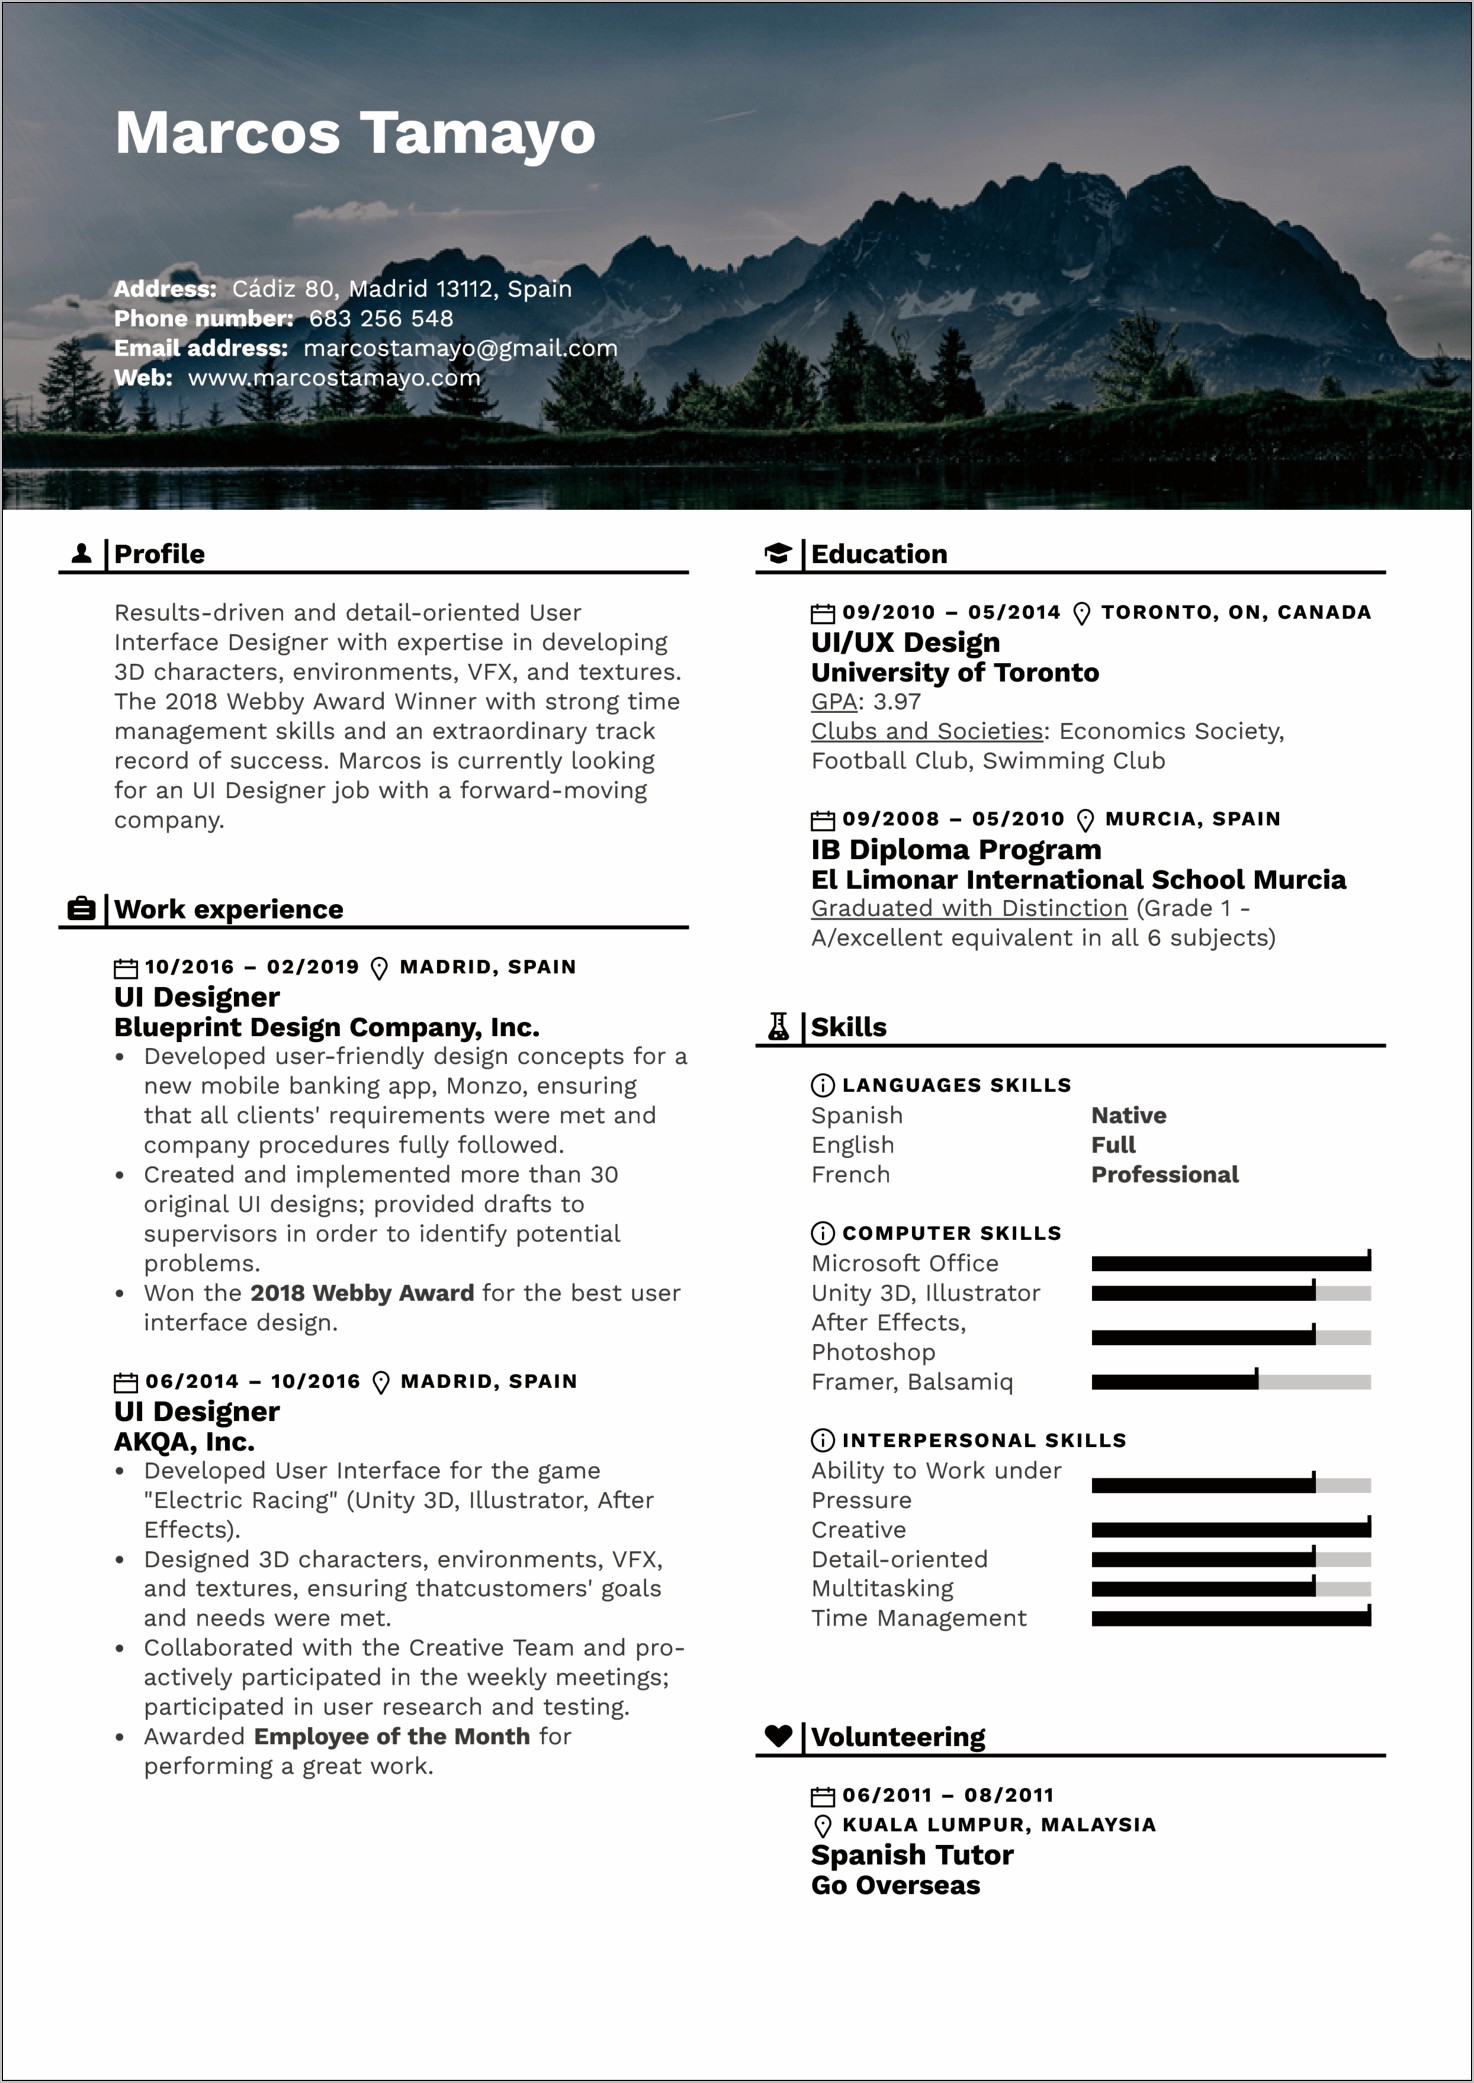 Good Resume Examples Character Artist